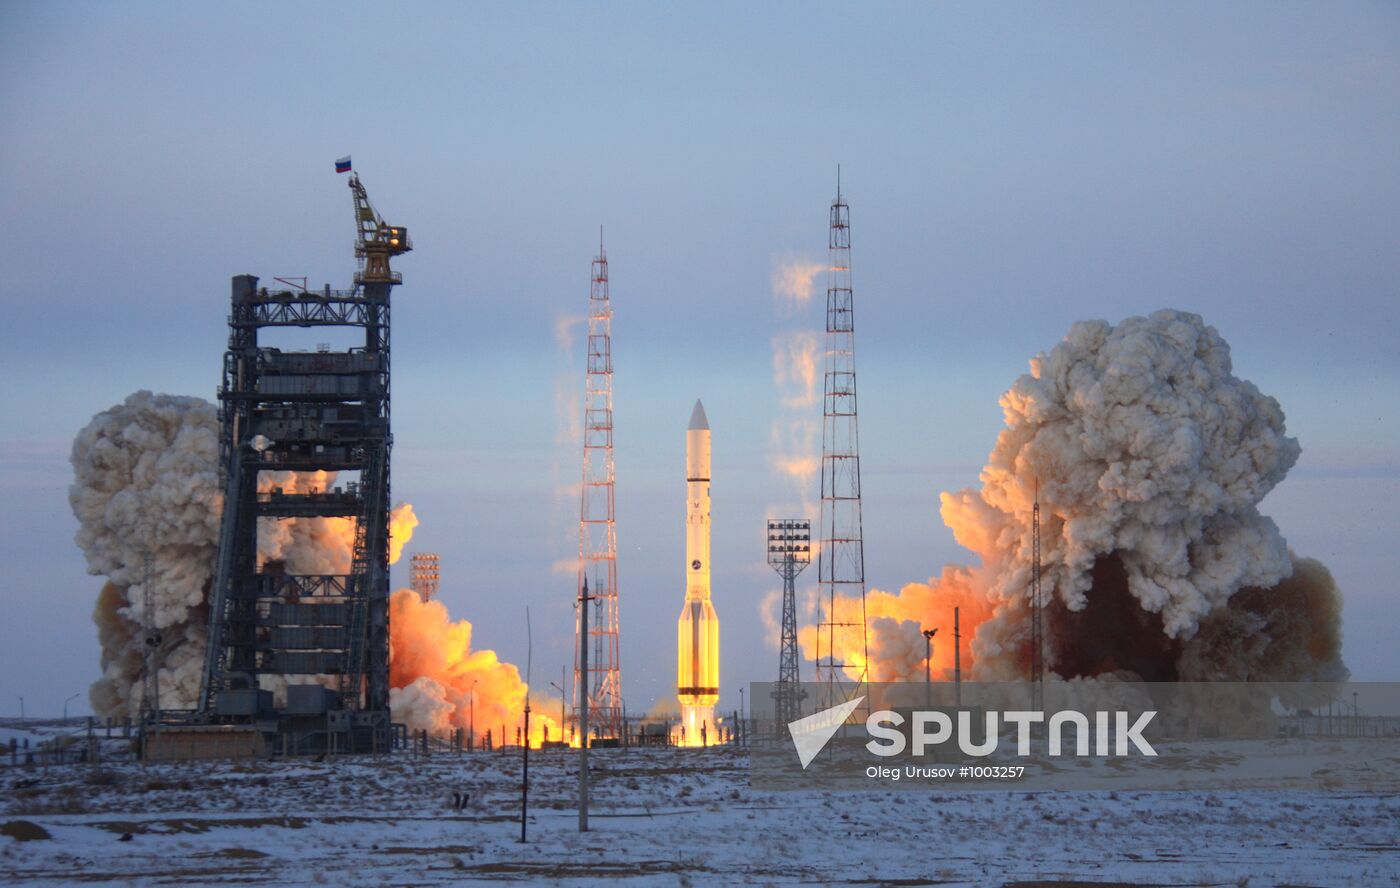 Carrier rocket "Proton-M" launched from Baikonur cosmodrome